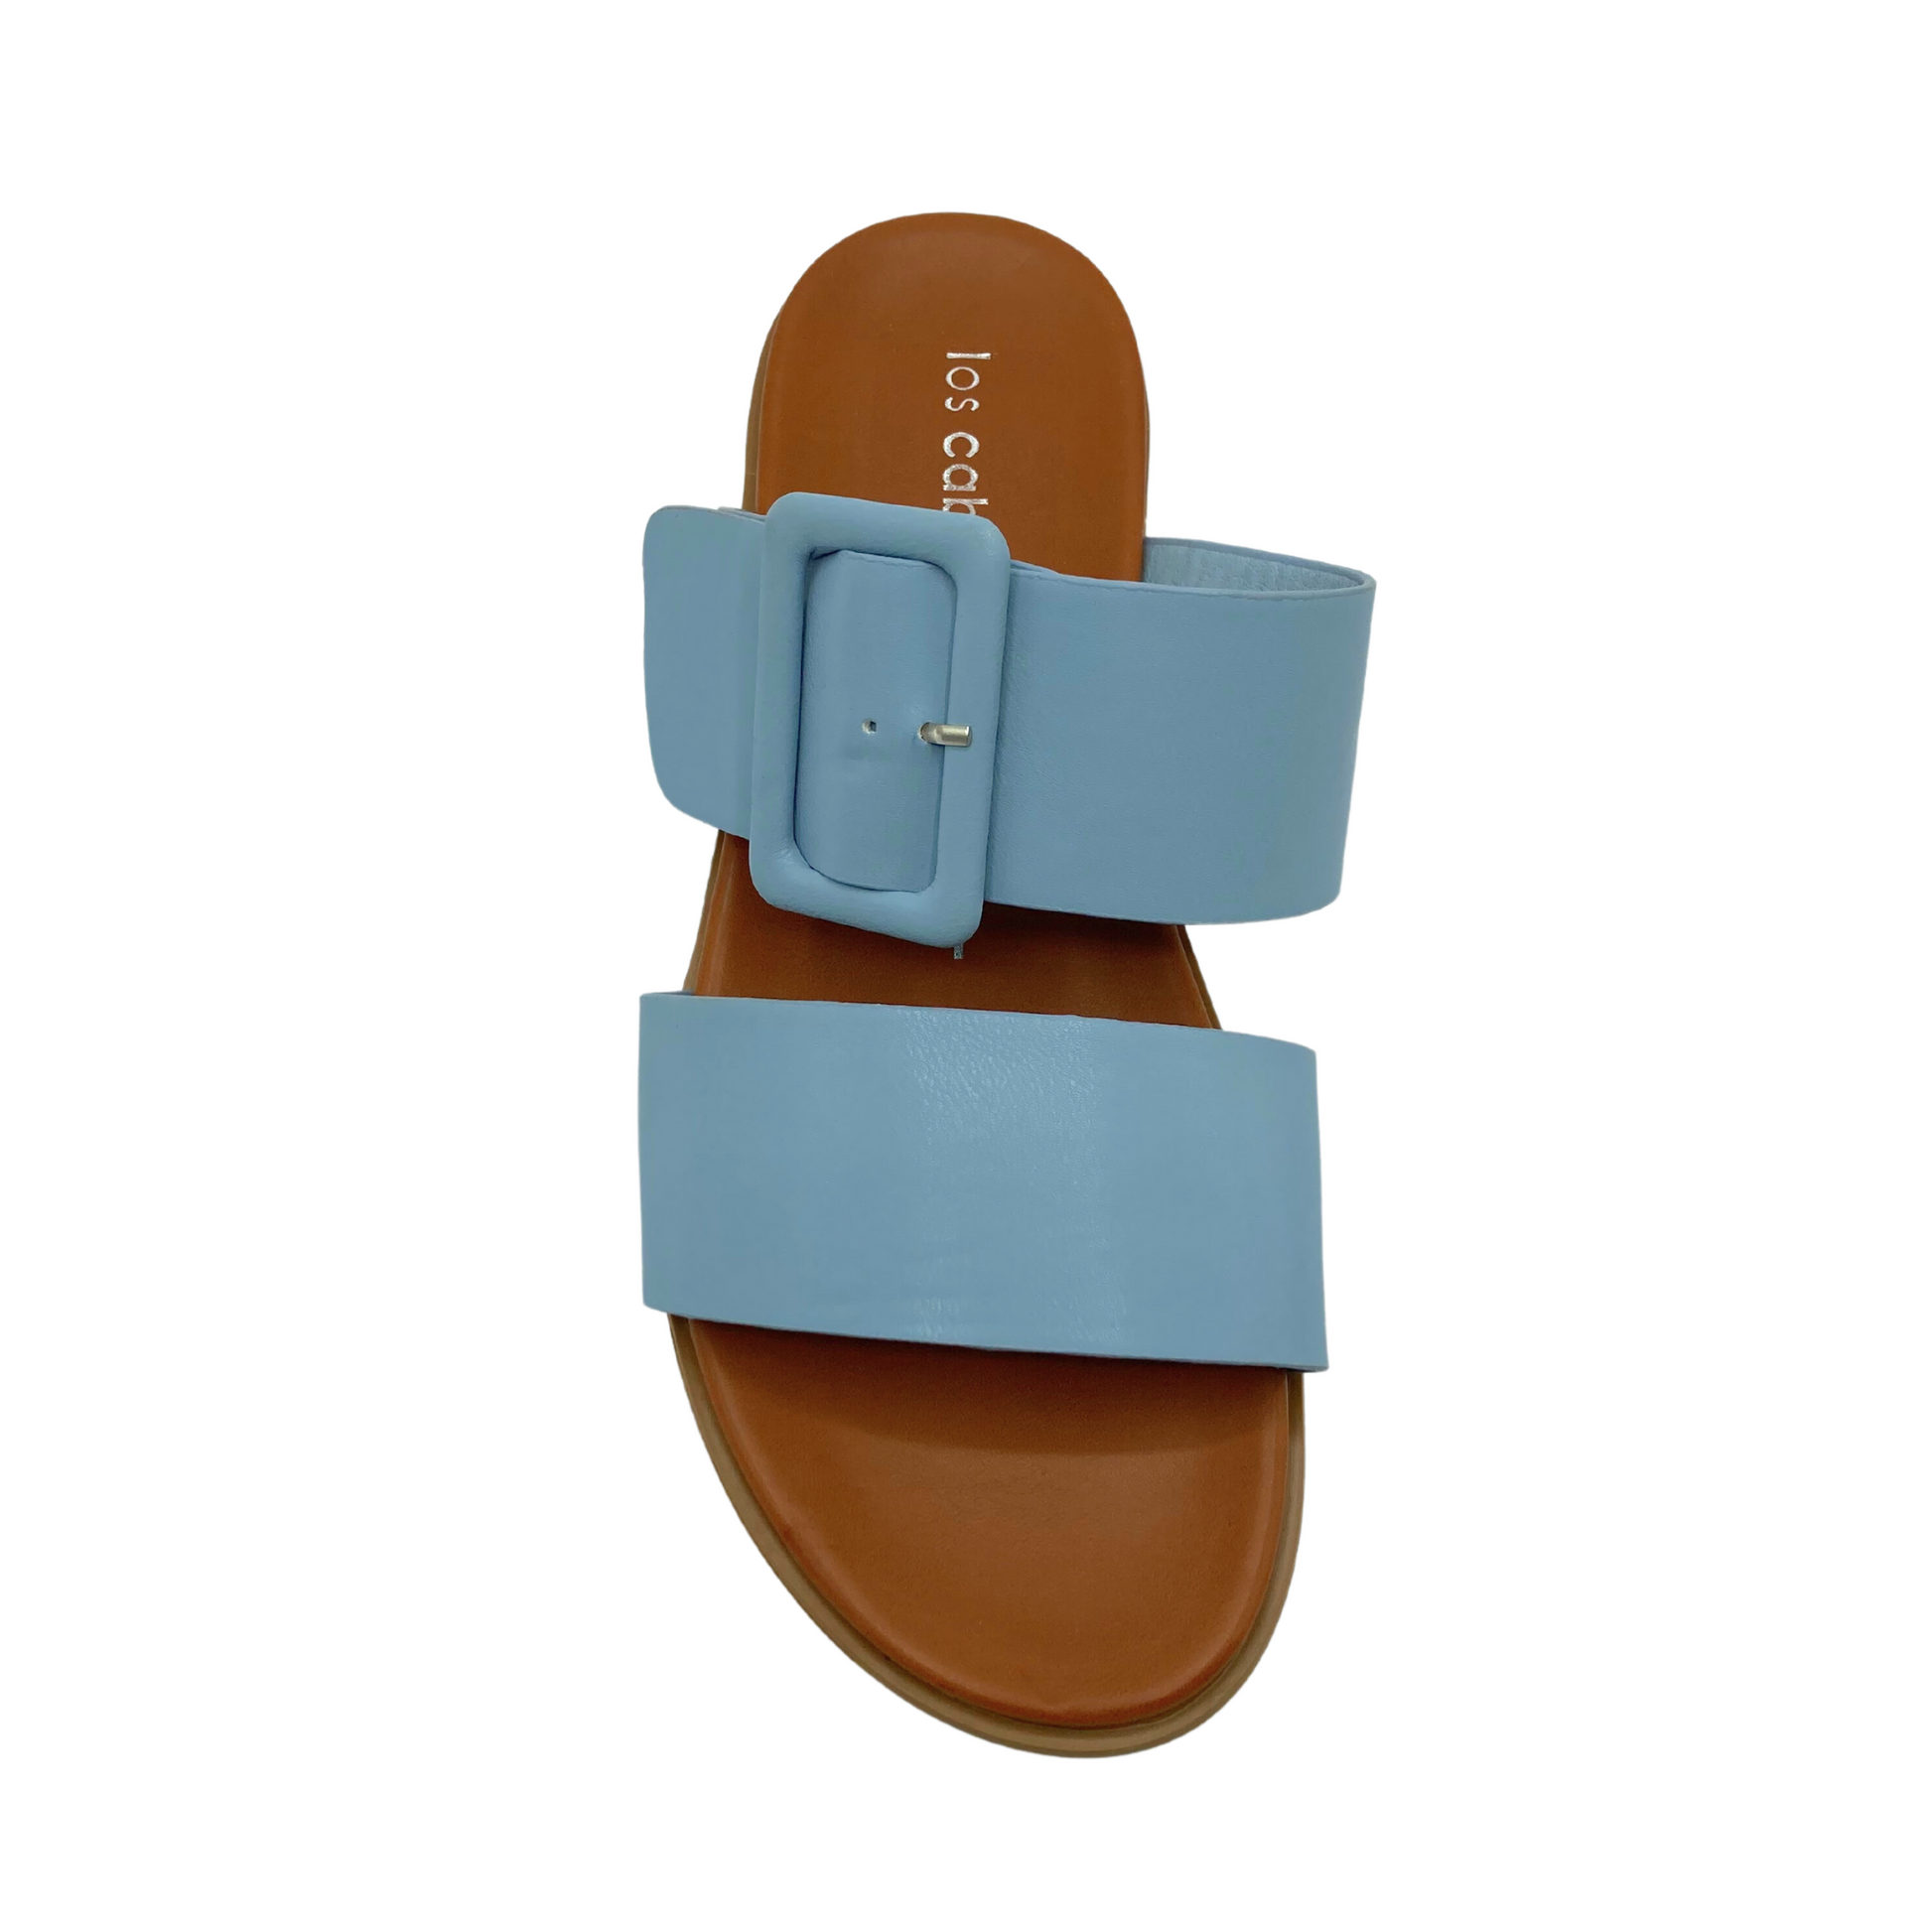 Top down view of a sandal with open toe and heel.  Two wide straps - one at forefoot and one over top with adjustable coordinating buckle